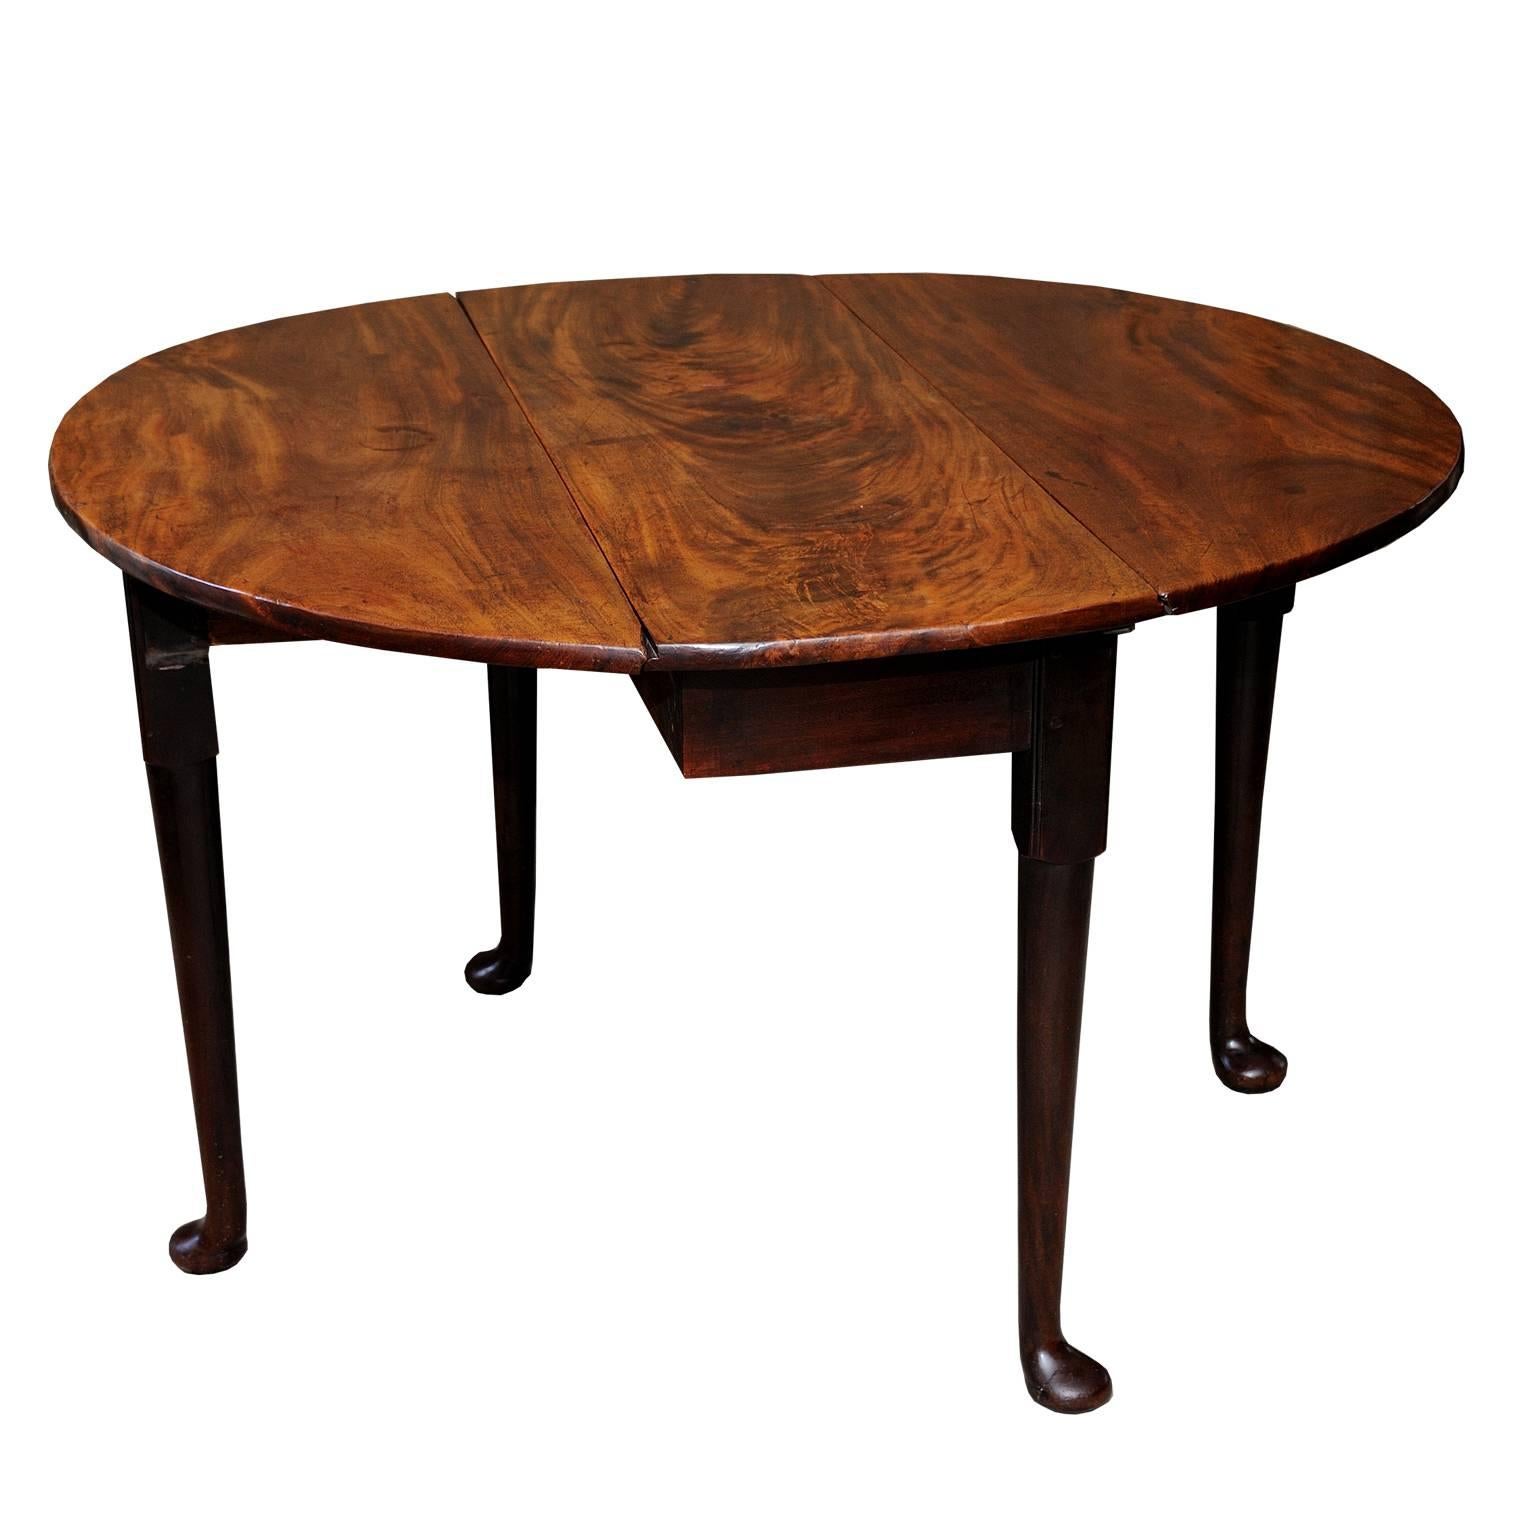 A fine mid-18th century George II pad foot oval gate leg table in well figured mahogany, circa 1740.